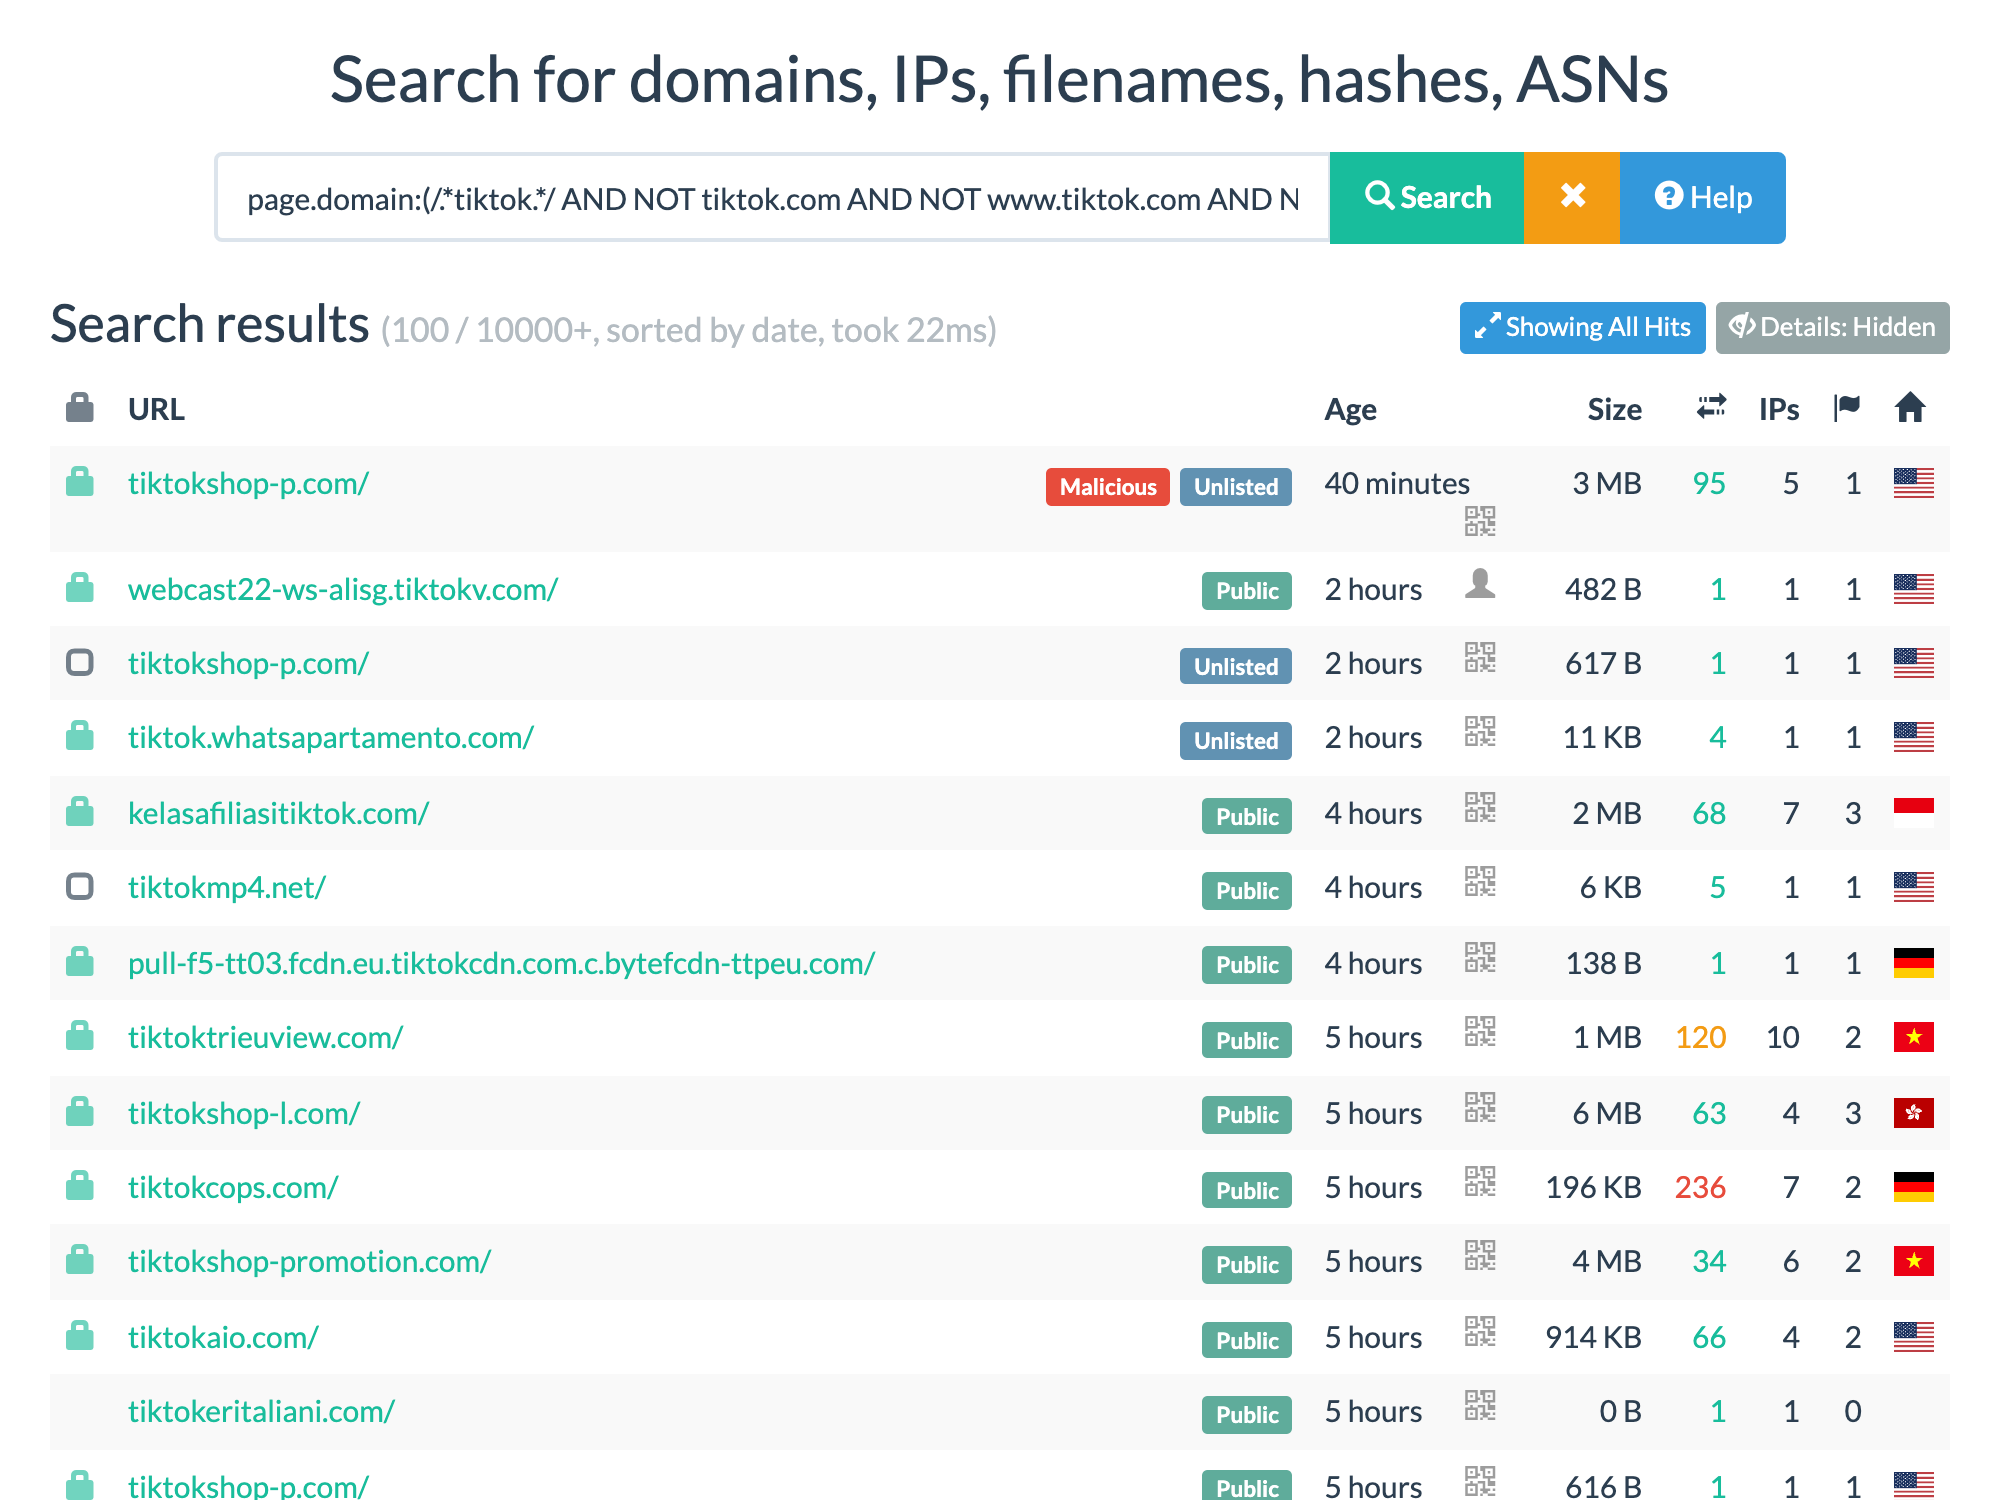 Search results for domains containing 